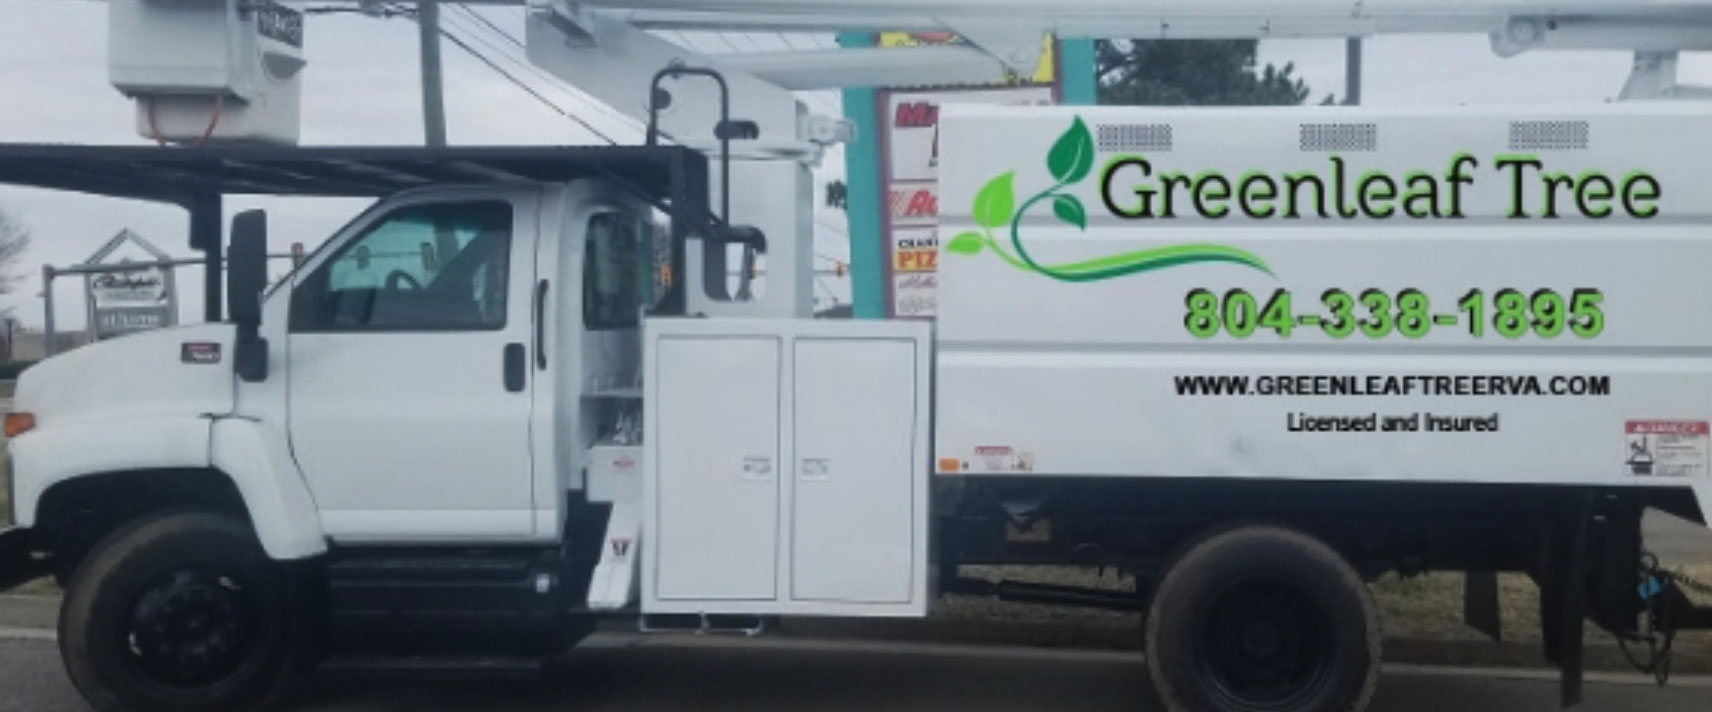 Company truck for our licensed tree specialists in Midlothian, VA.